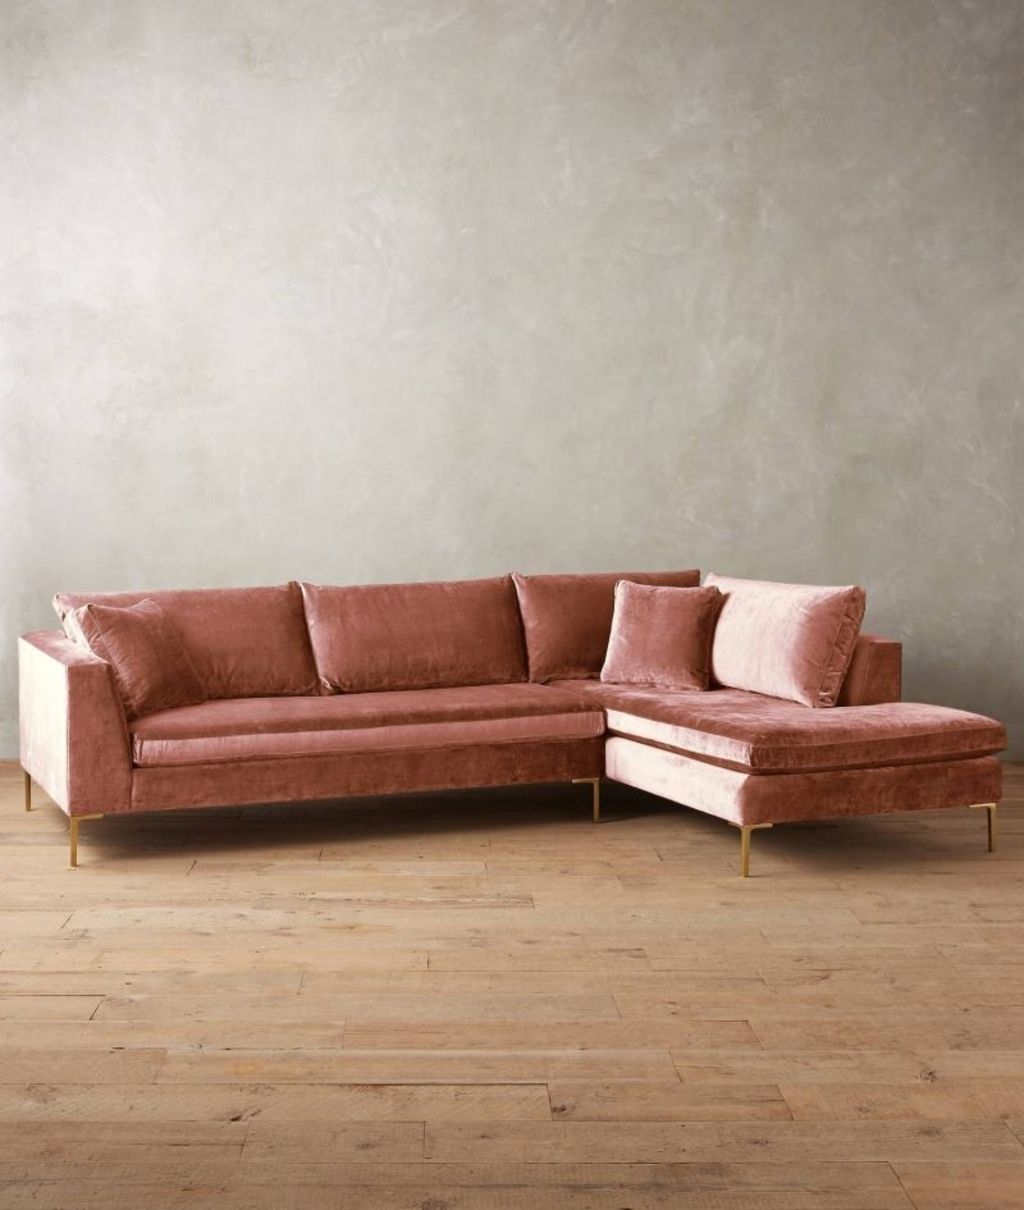 The 10 Best Collection of Velvet Sectional Sofas